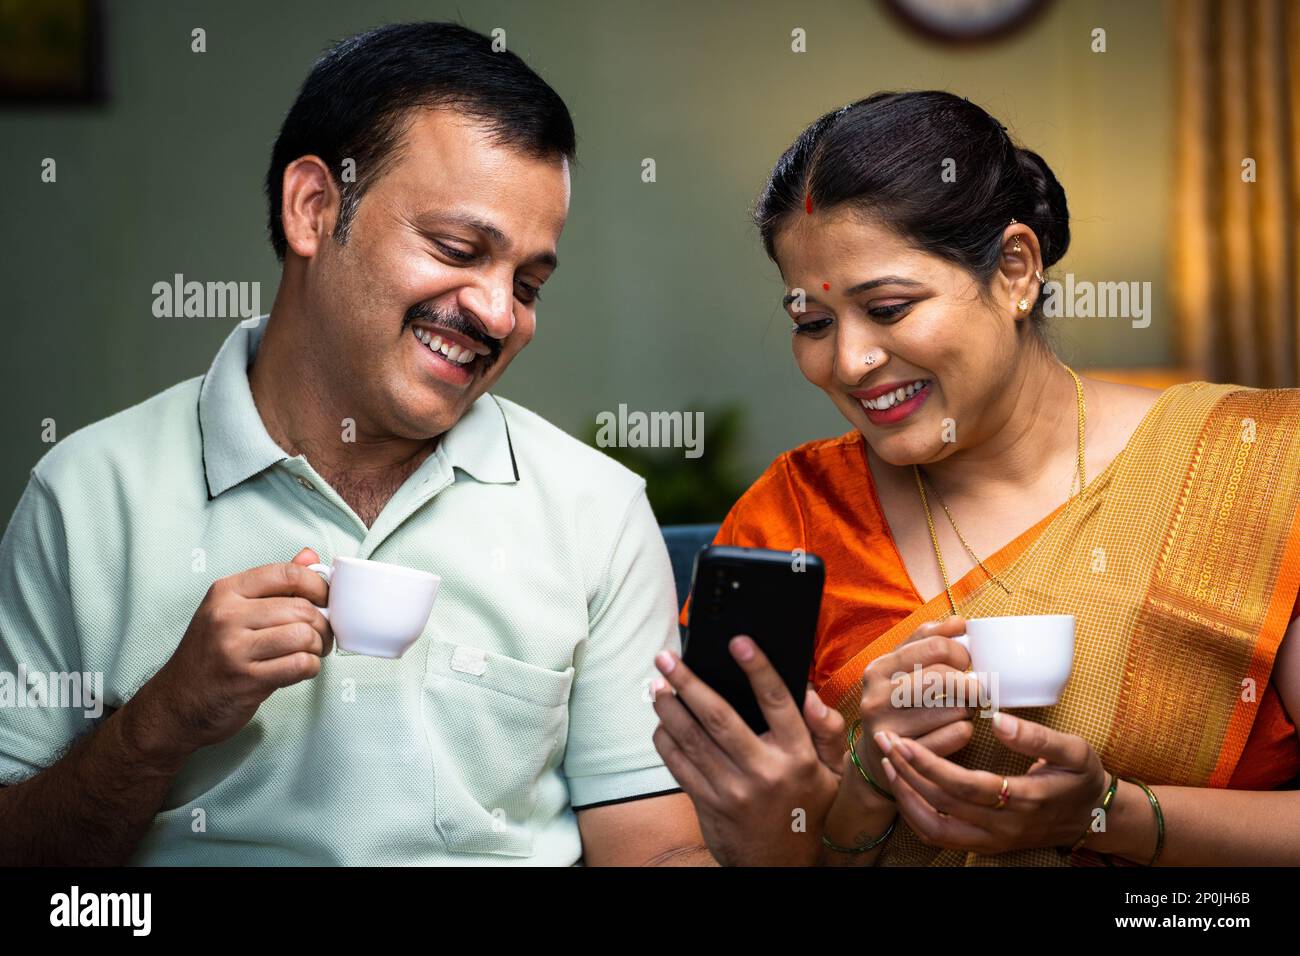 Happy smiling couple drinking tea while watching mobile phone at home - concept of relaxation, refreshment and relationship bonding. Stock Photo